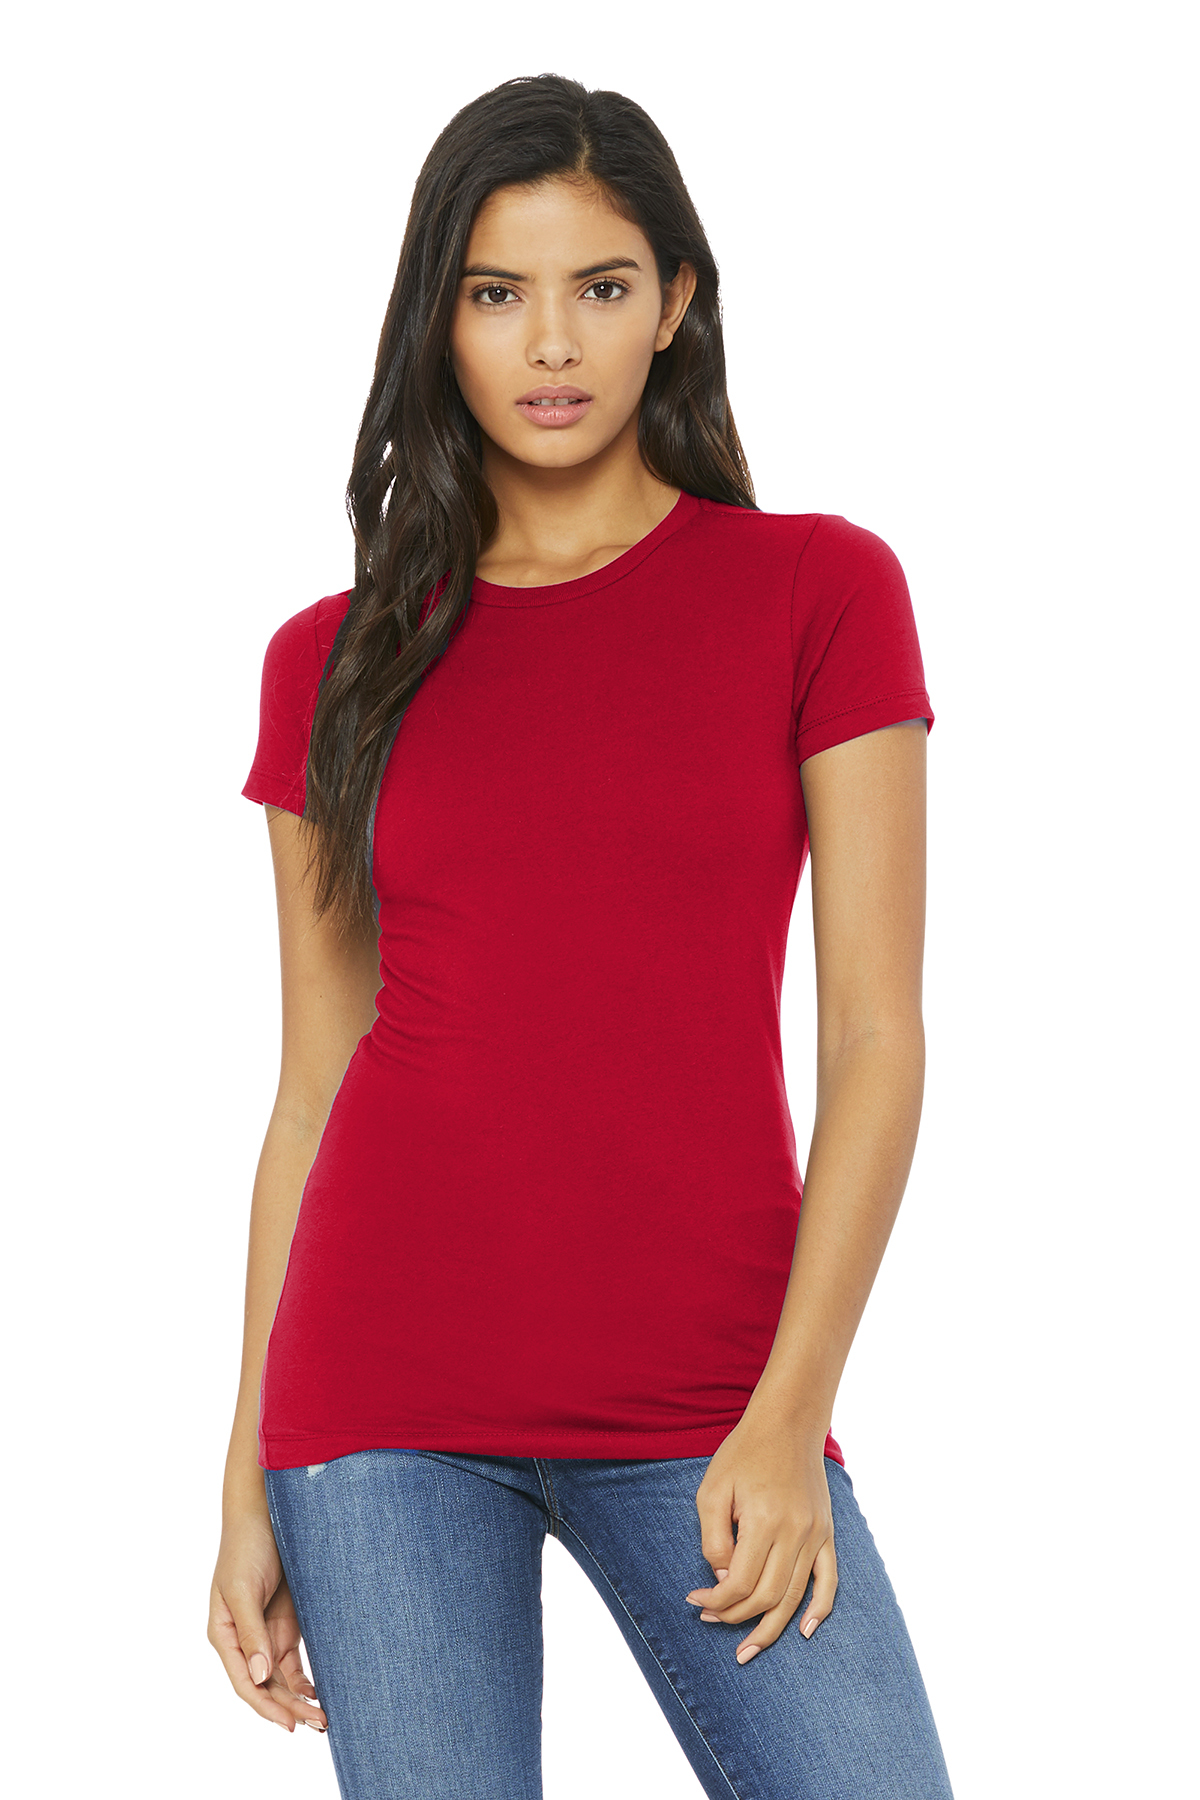 BELLA+CANVAS Women’s Slim Fit Tee | Product | Company Casuals